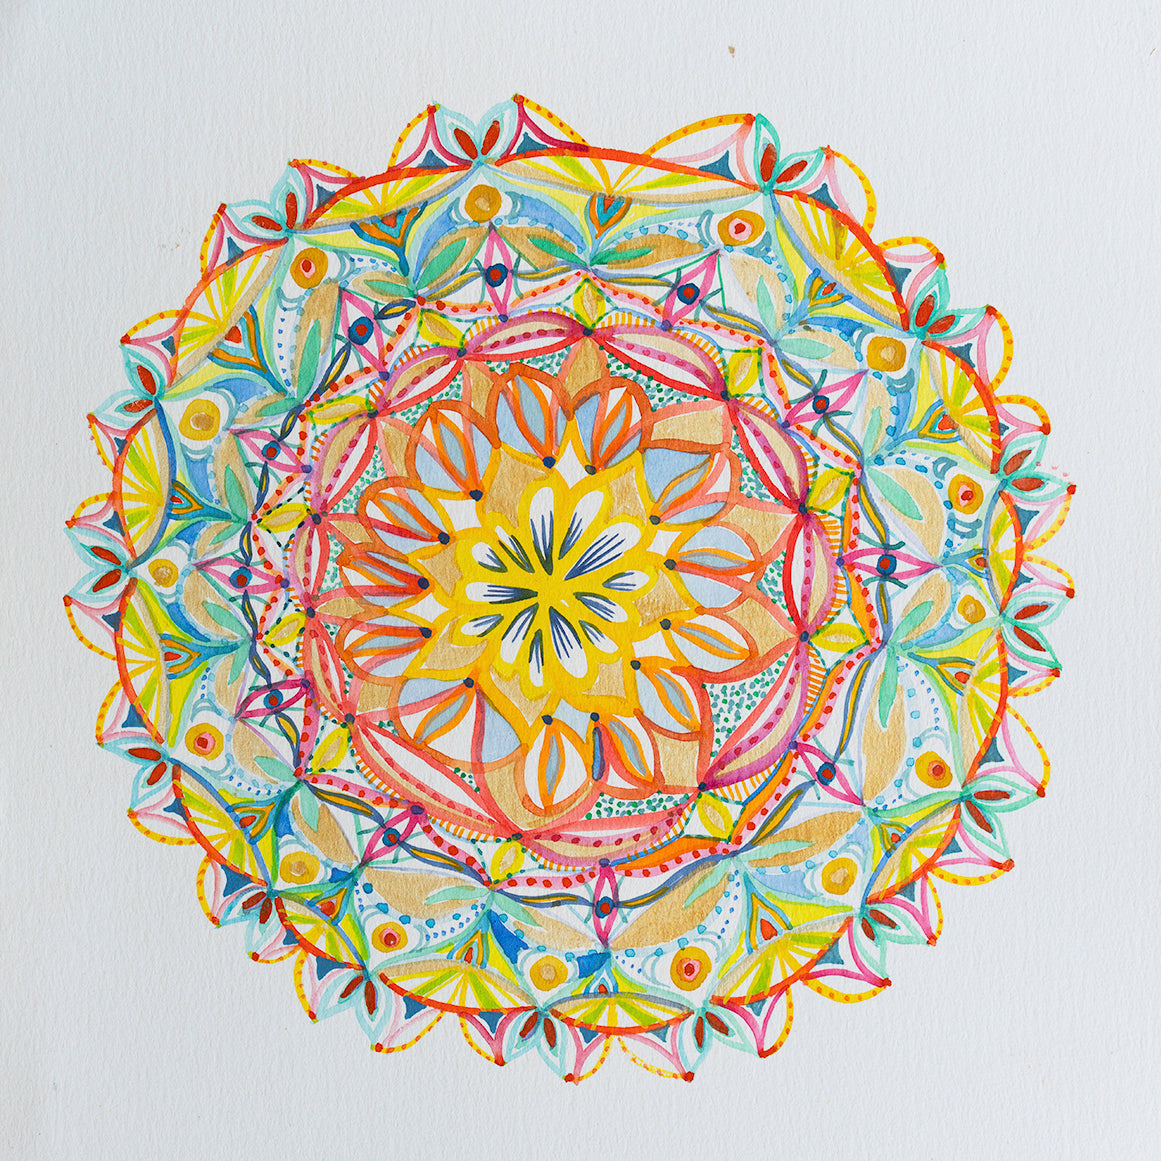 Mixed media on paper, "Glowing Sunshine Activation"